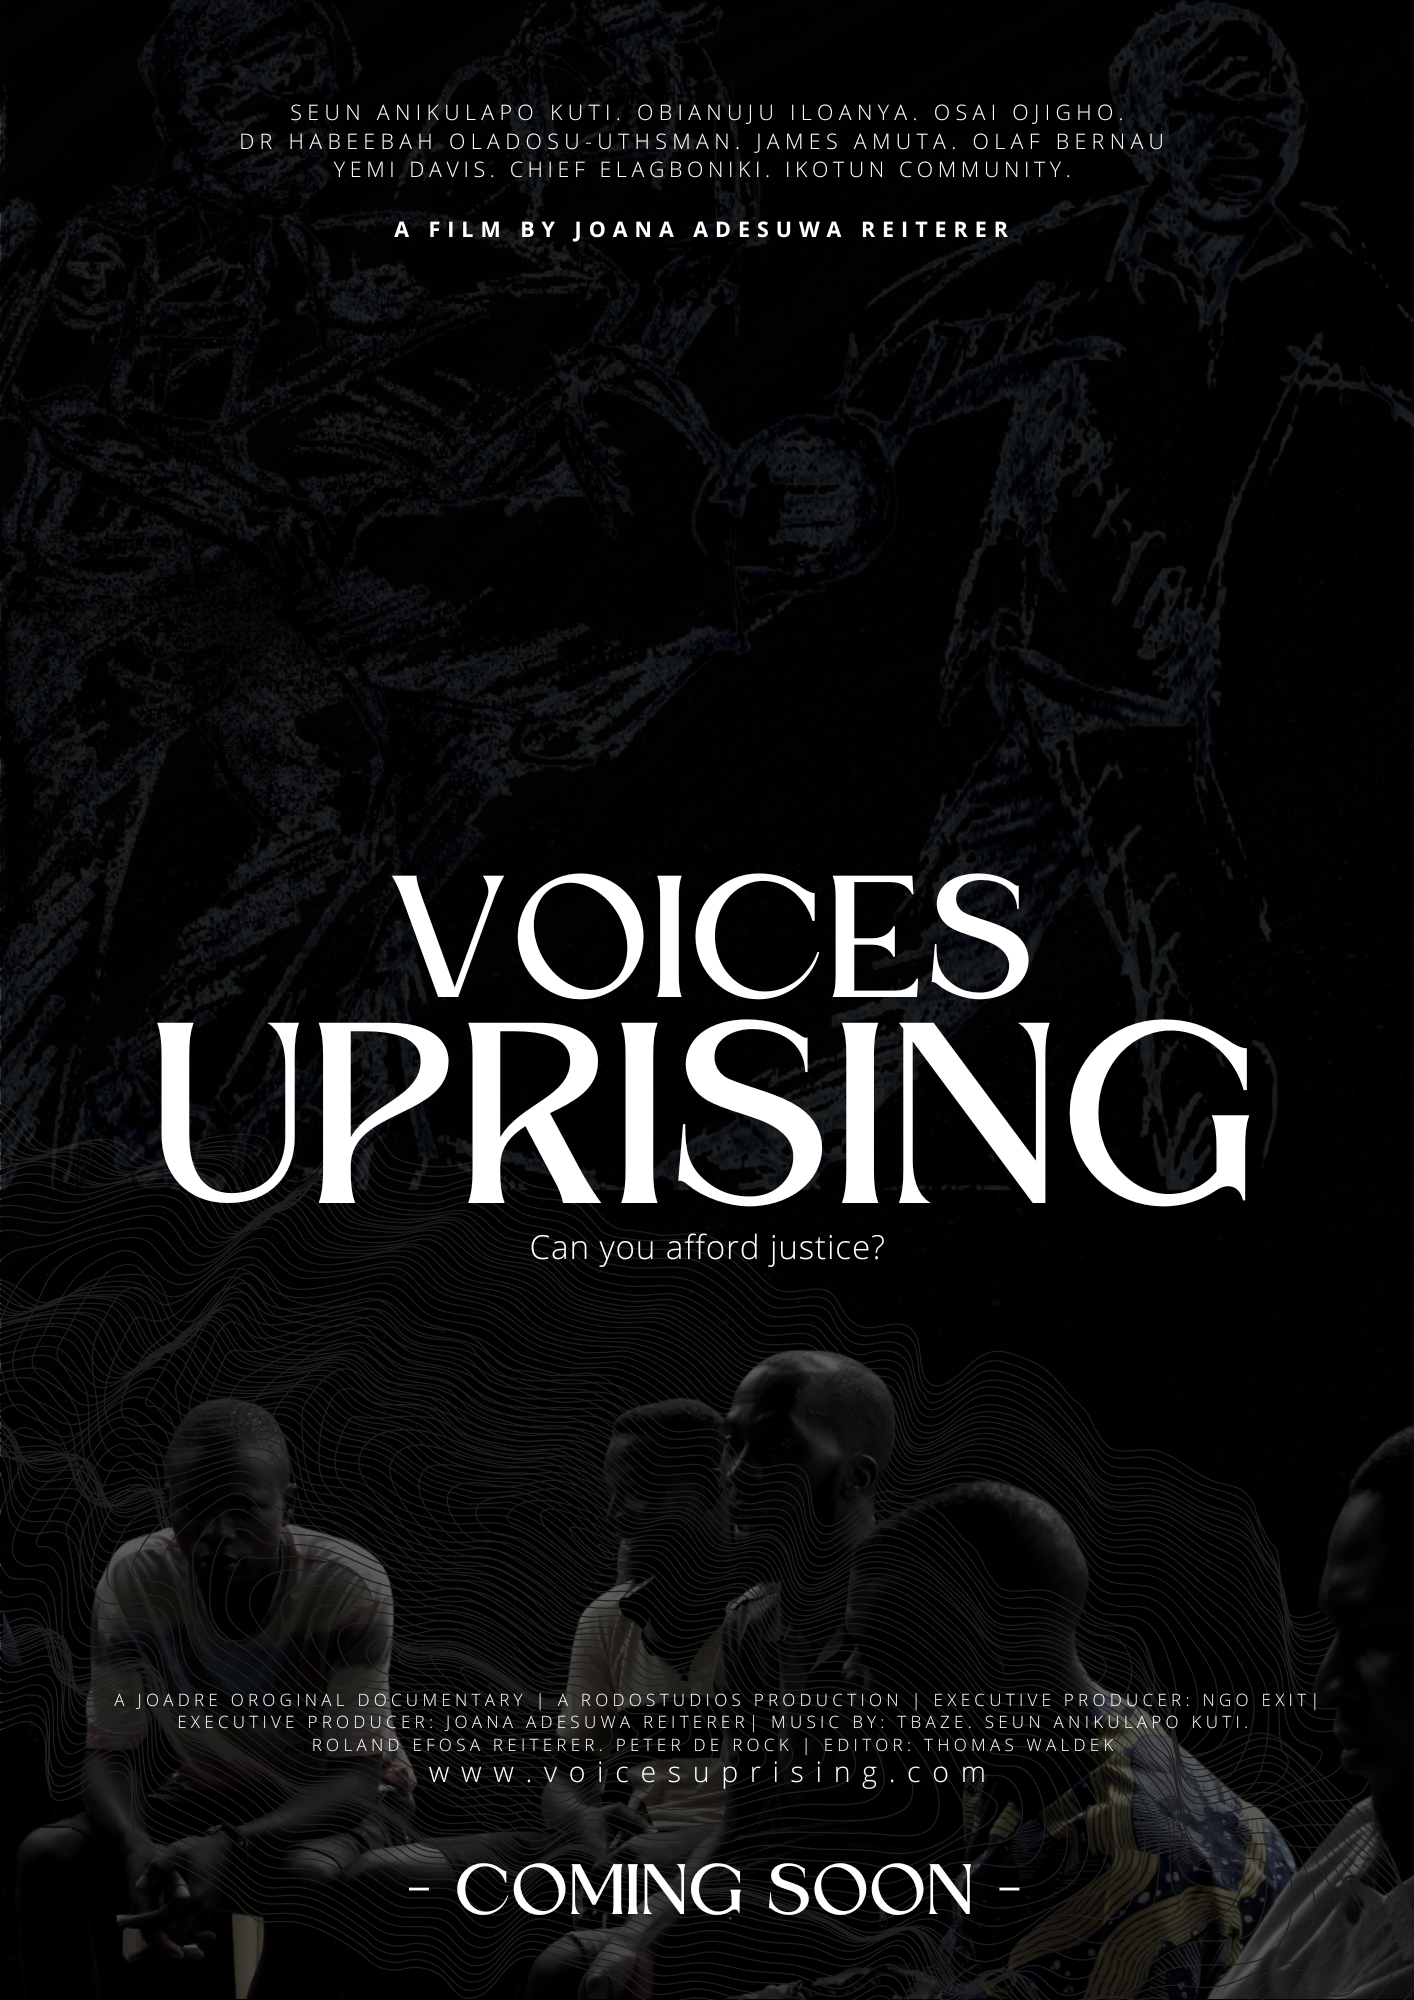 Documentary Expose - Voices Uprising